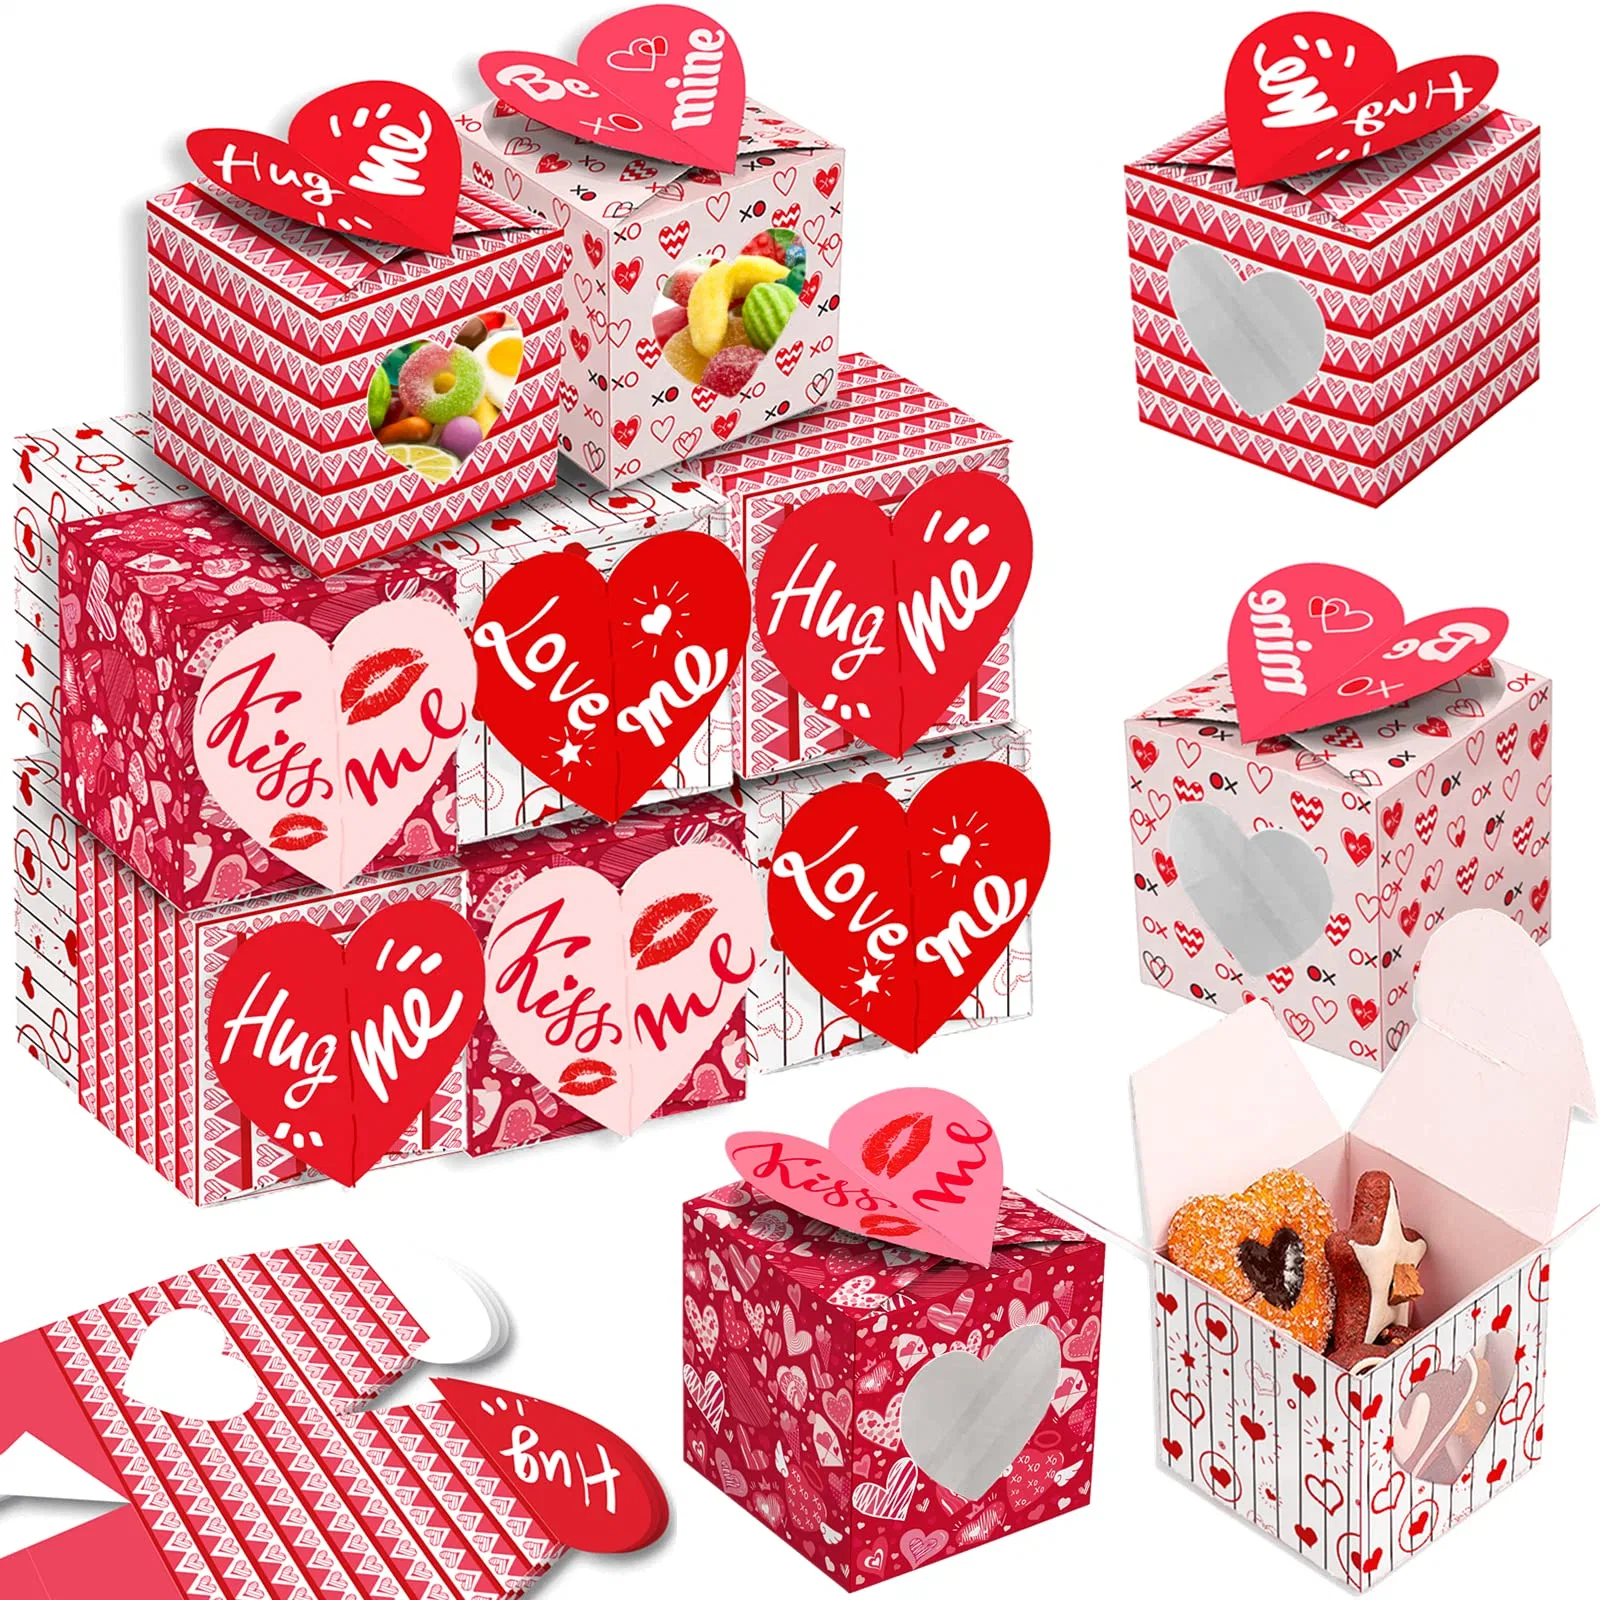 Festival Pastries Boxes with Clear Heart Shape Window Used in Bakery Colorful Dessert for Gift Giving Love Treat Box for Valentine's Day Party Gift Packaging